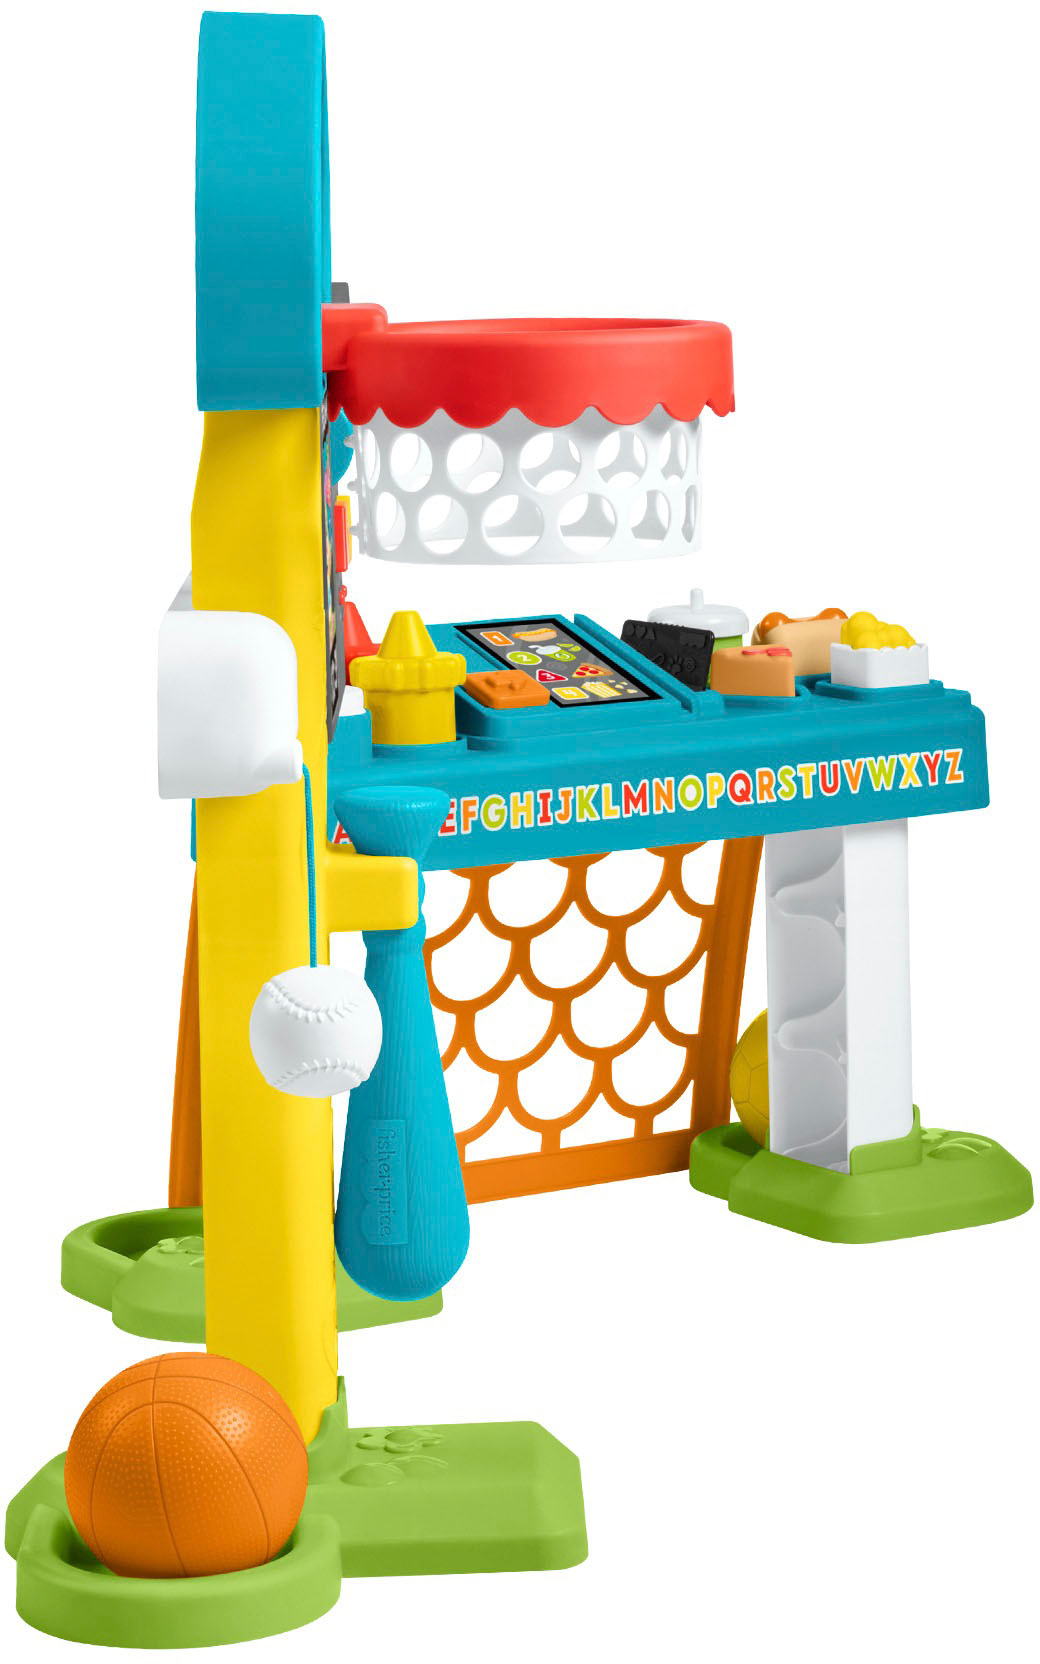 Fisher-Price Laugh & Learn Grow-the-Fun Garden to  - Best Buy